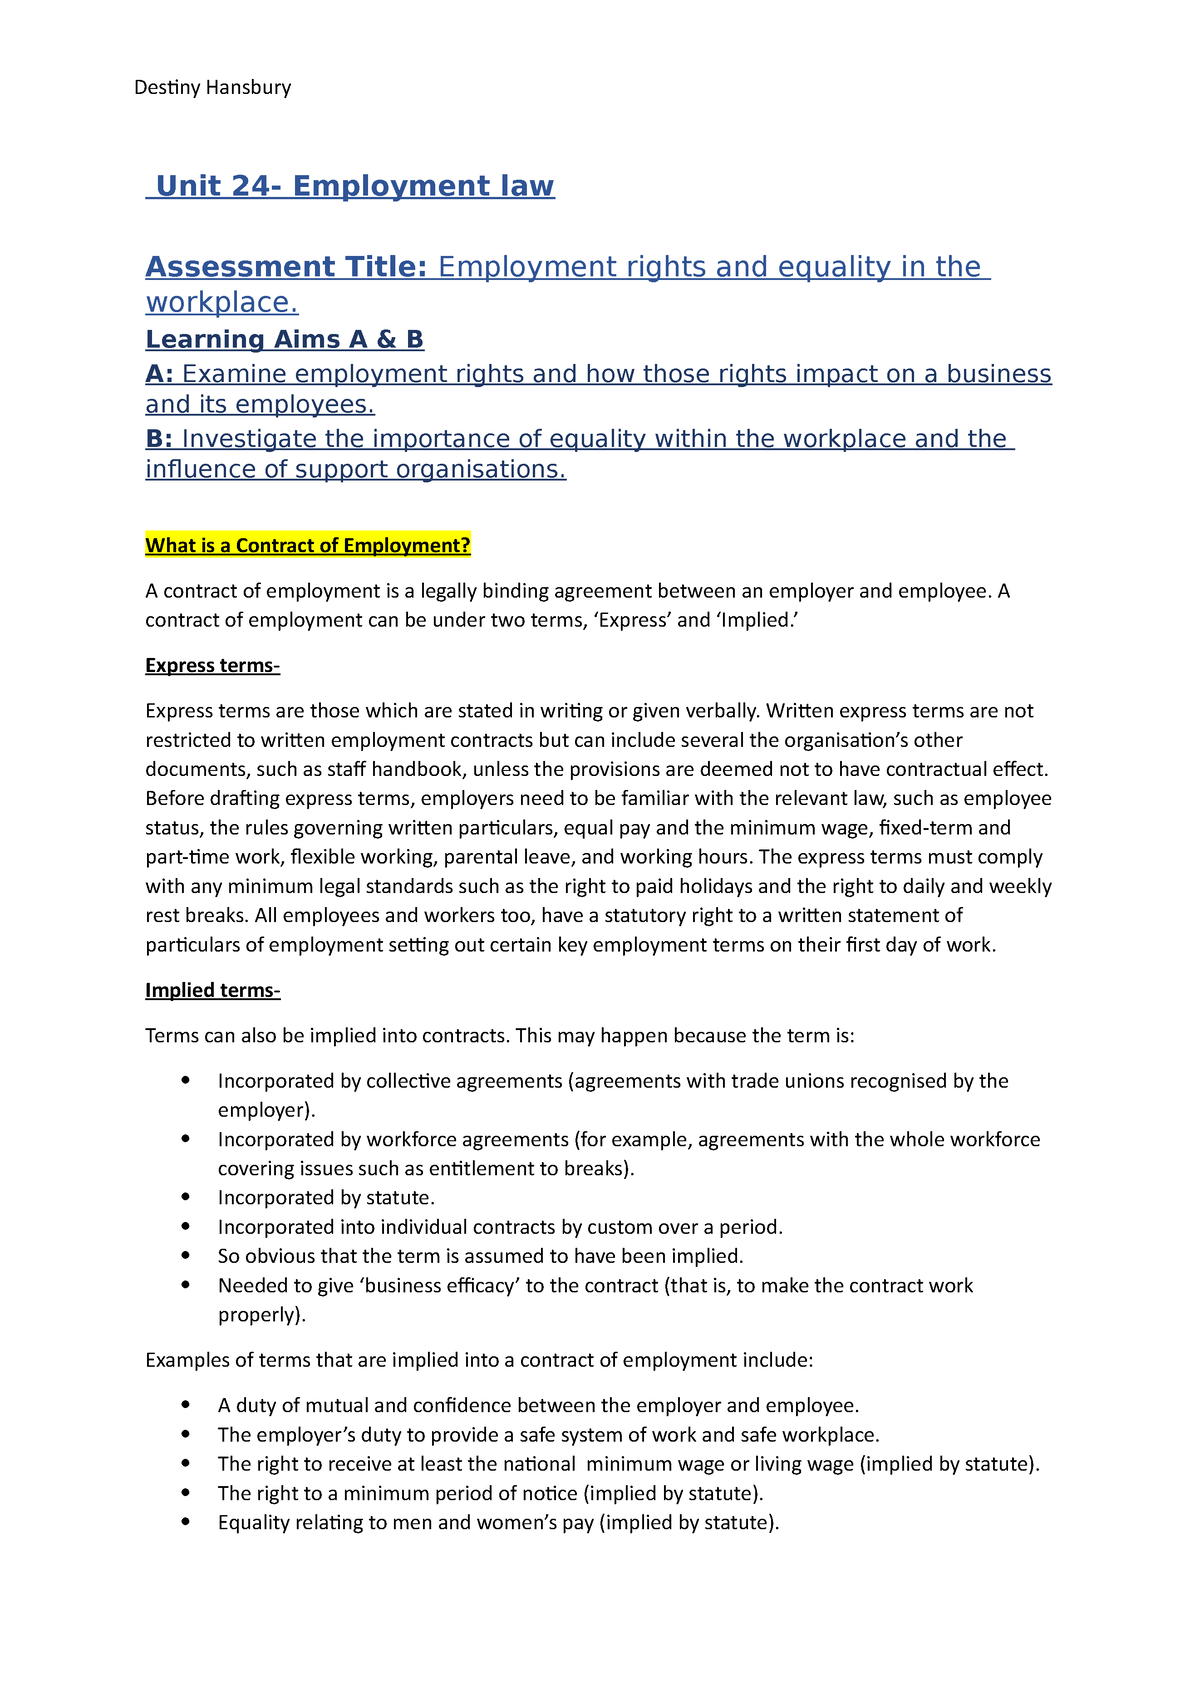 unit 24 employment law assignment 1